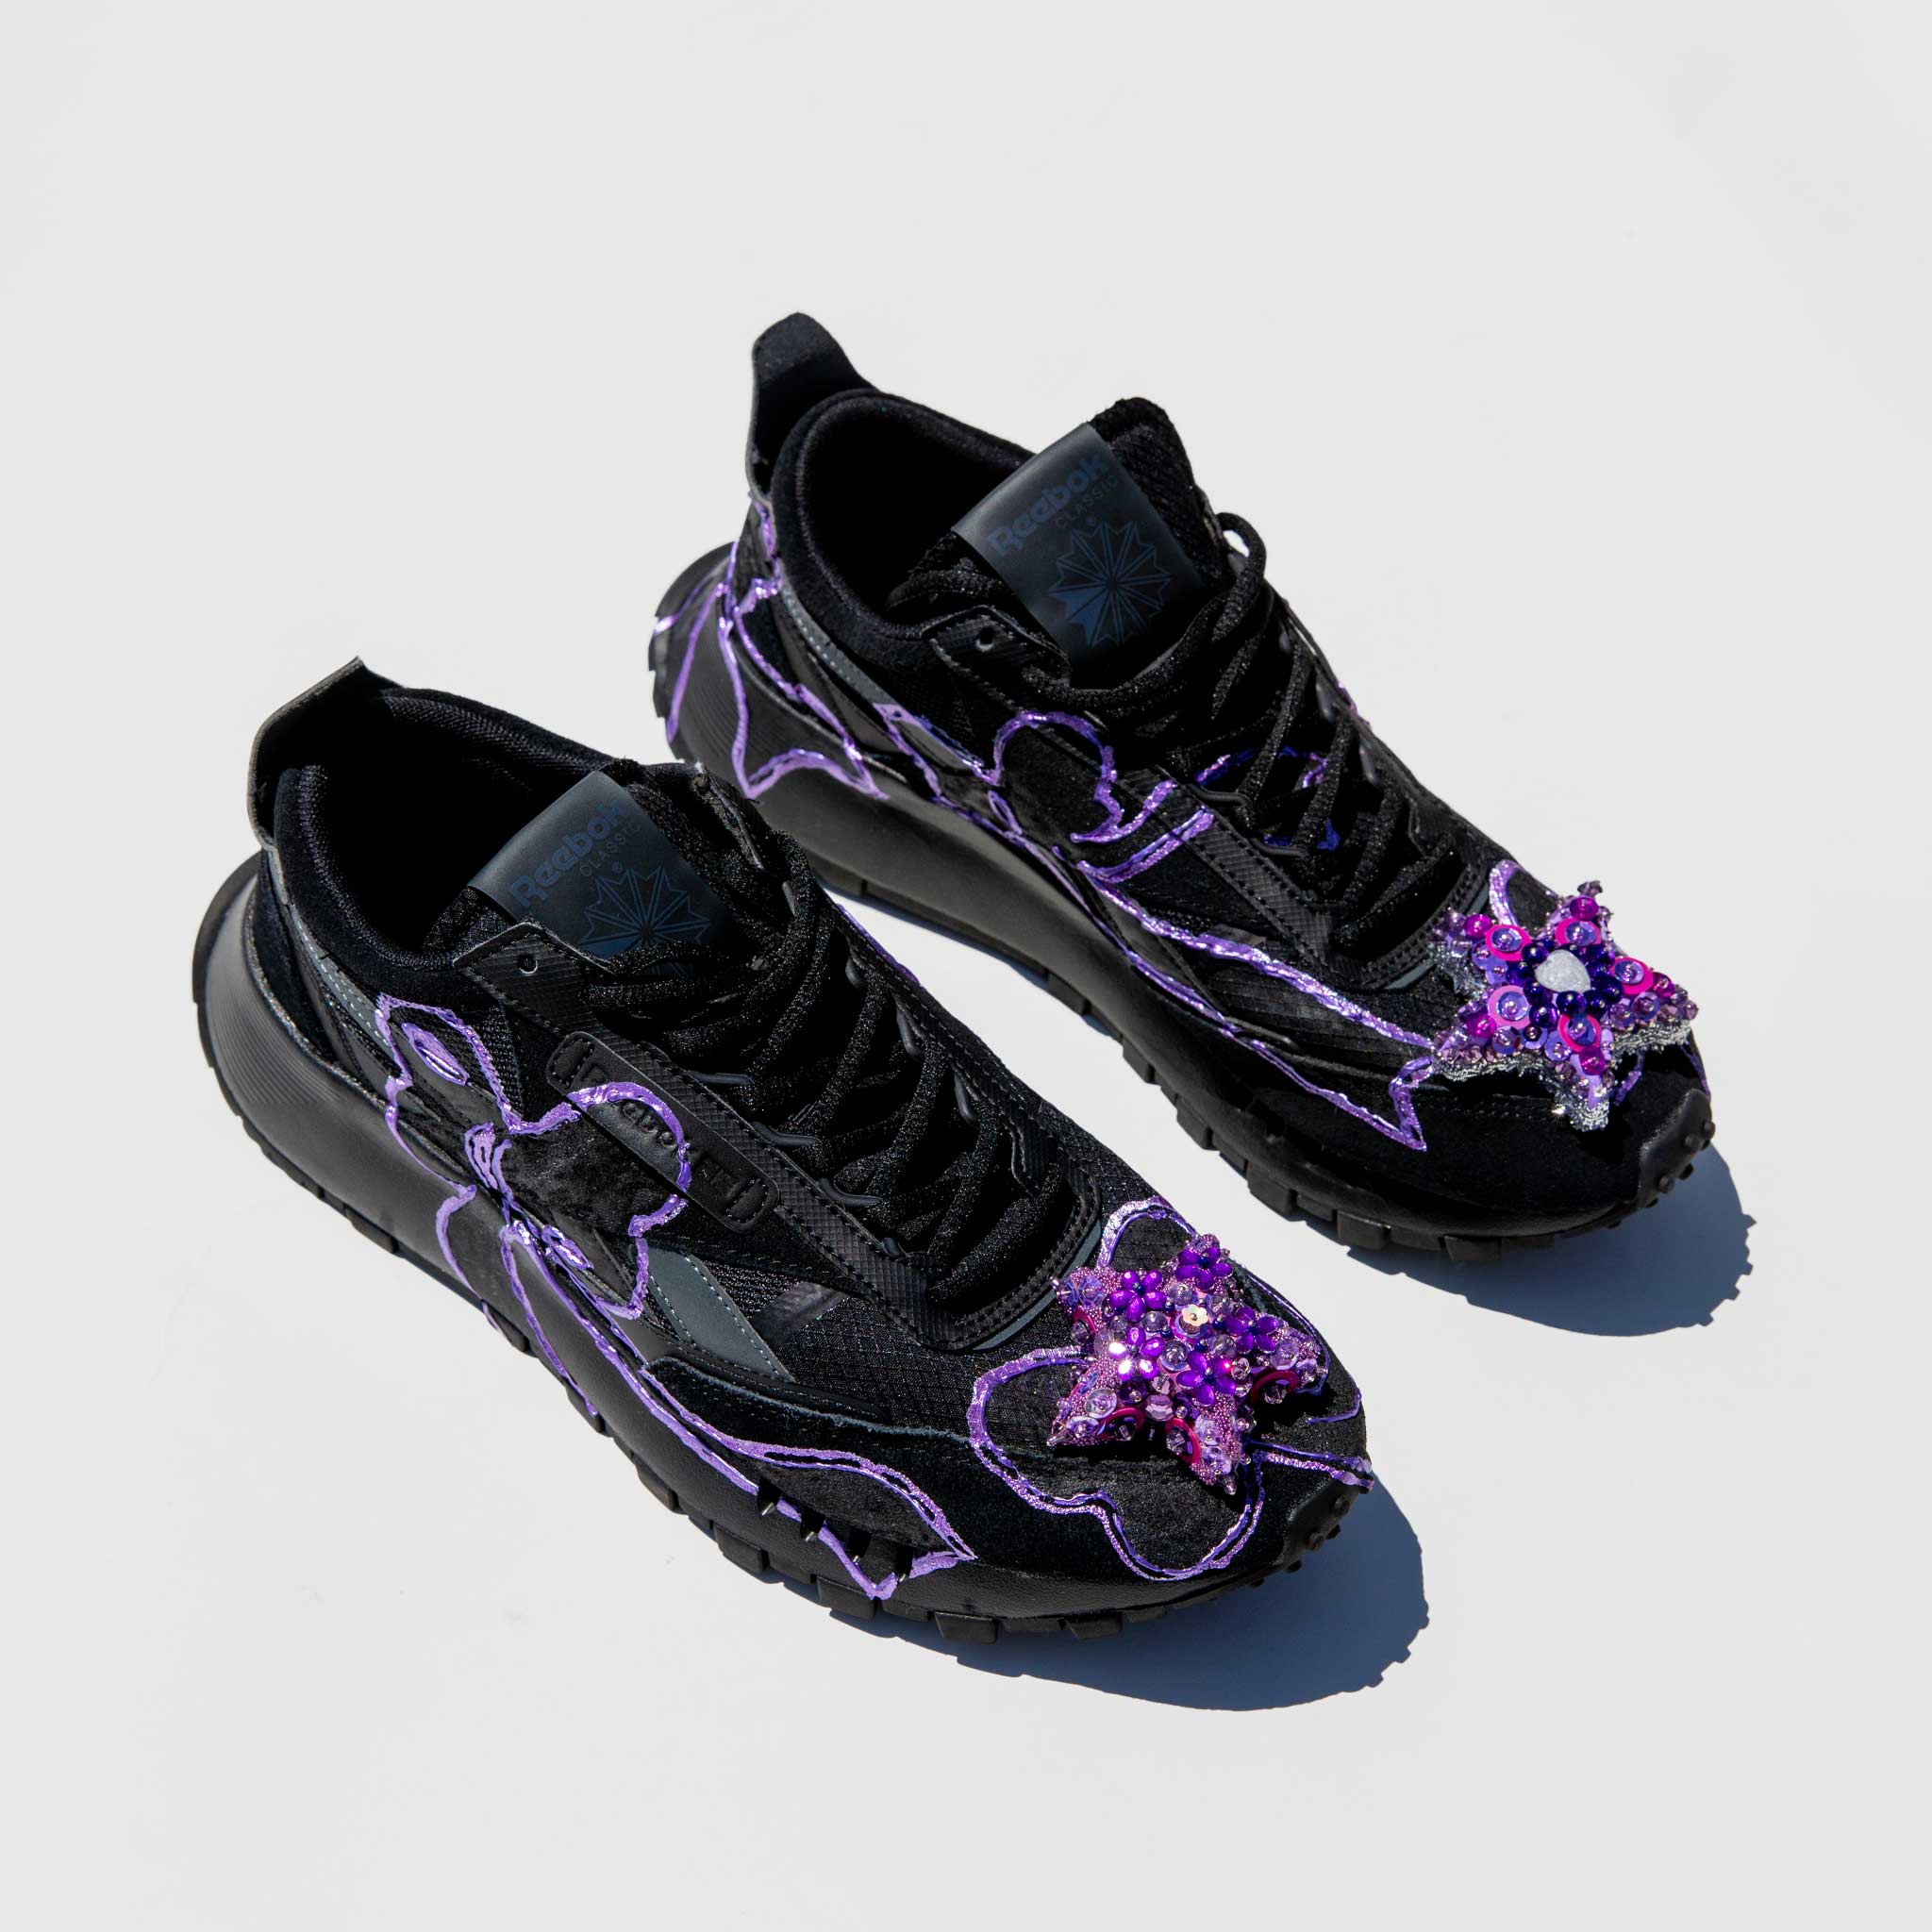 Collina Strada Reebok Black with Purple Sequin Toe - Size 8.5 [Runway Sample] | available at LCD